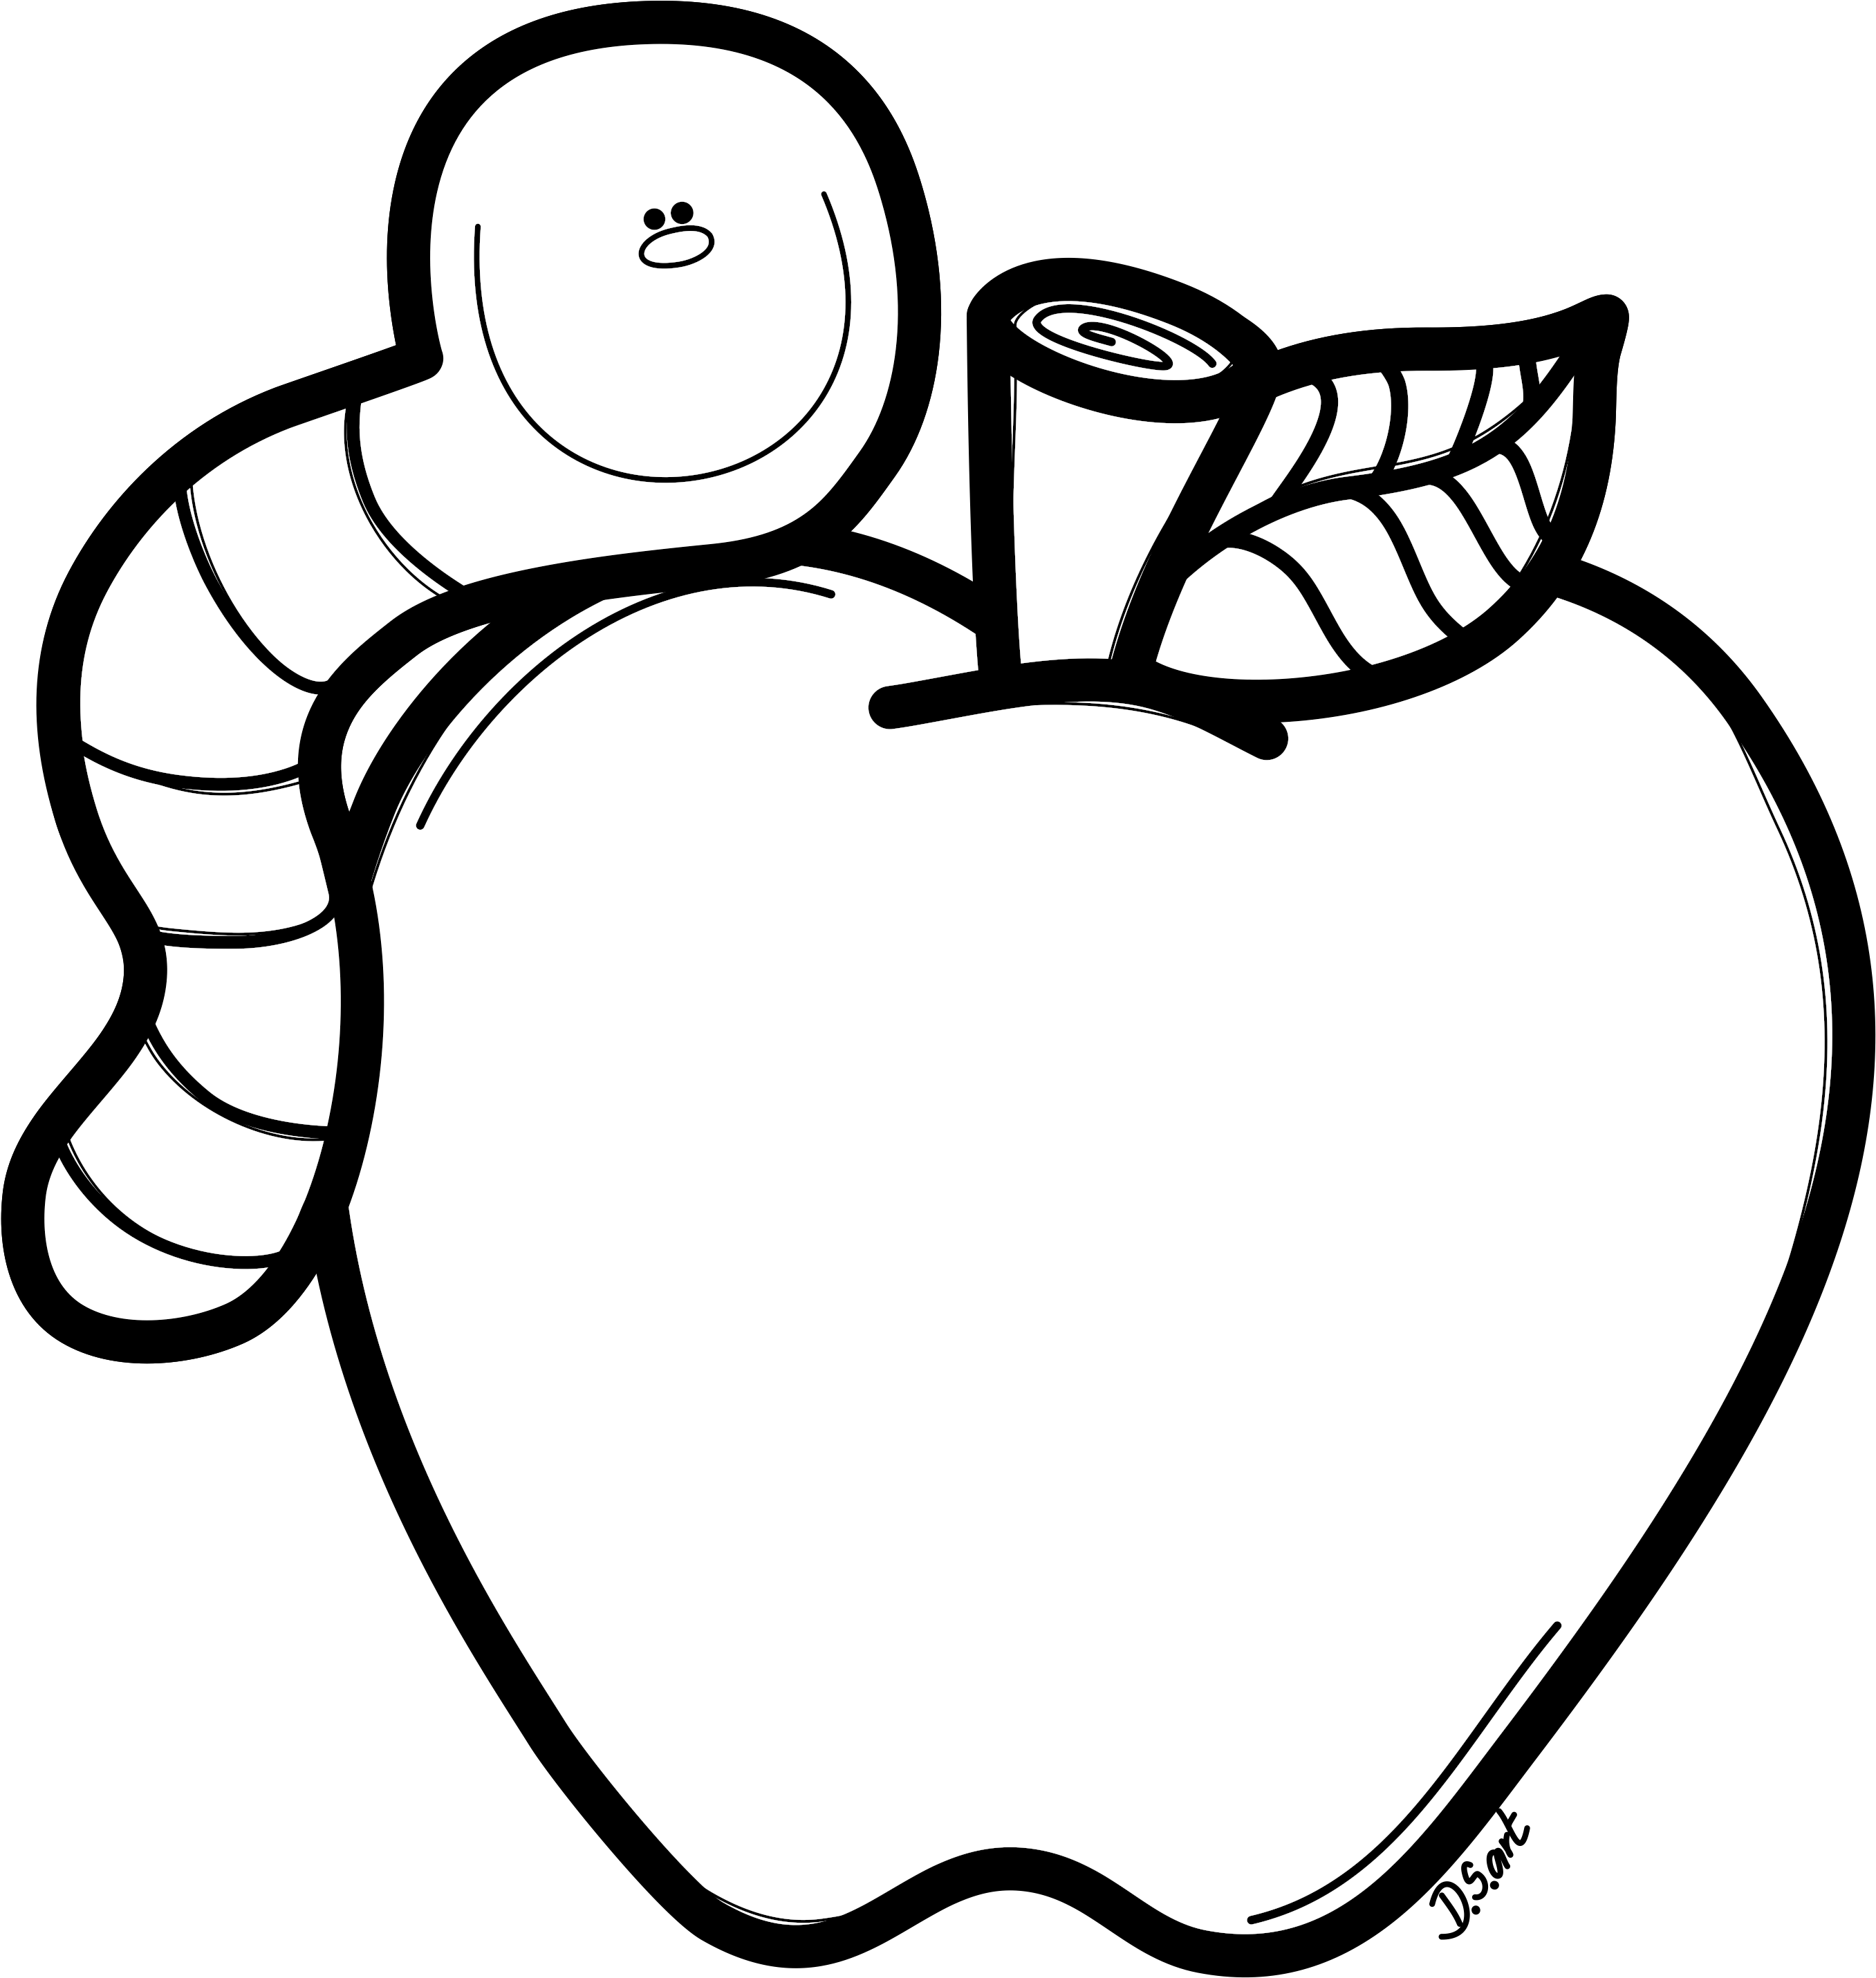 Black And White Coloring Page Of Apple And Worm - Black And White Coloring Page Of Apple And Worm (2875x2917)